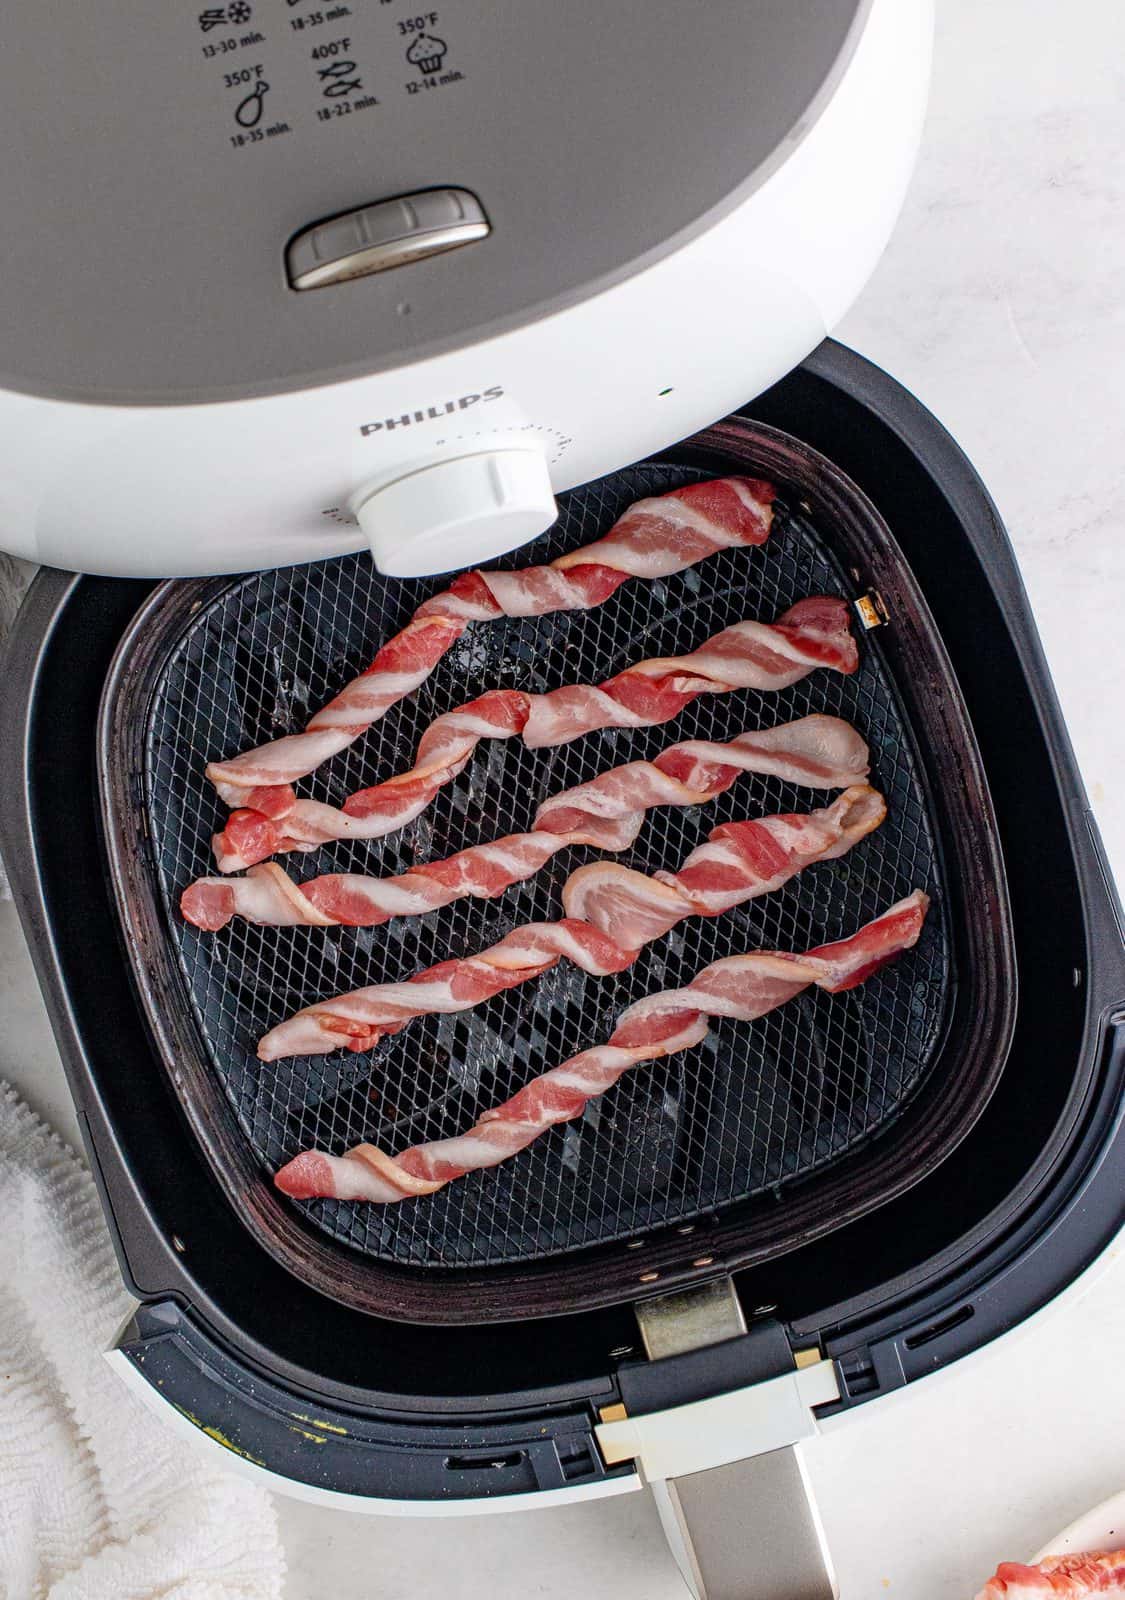 Bacon twisted in basket of air fryer.